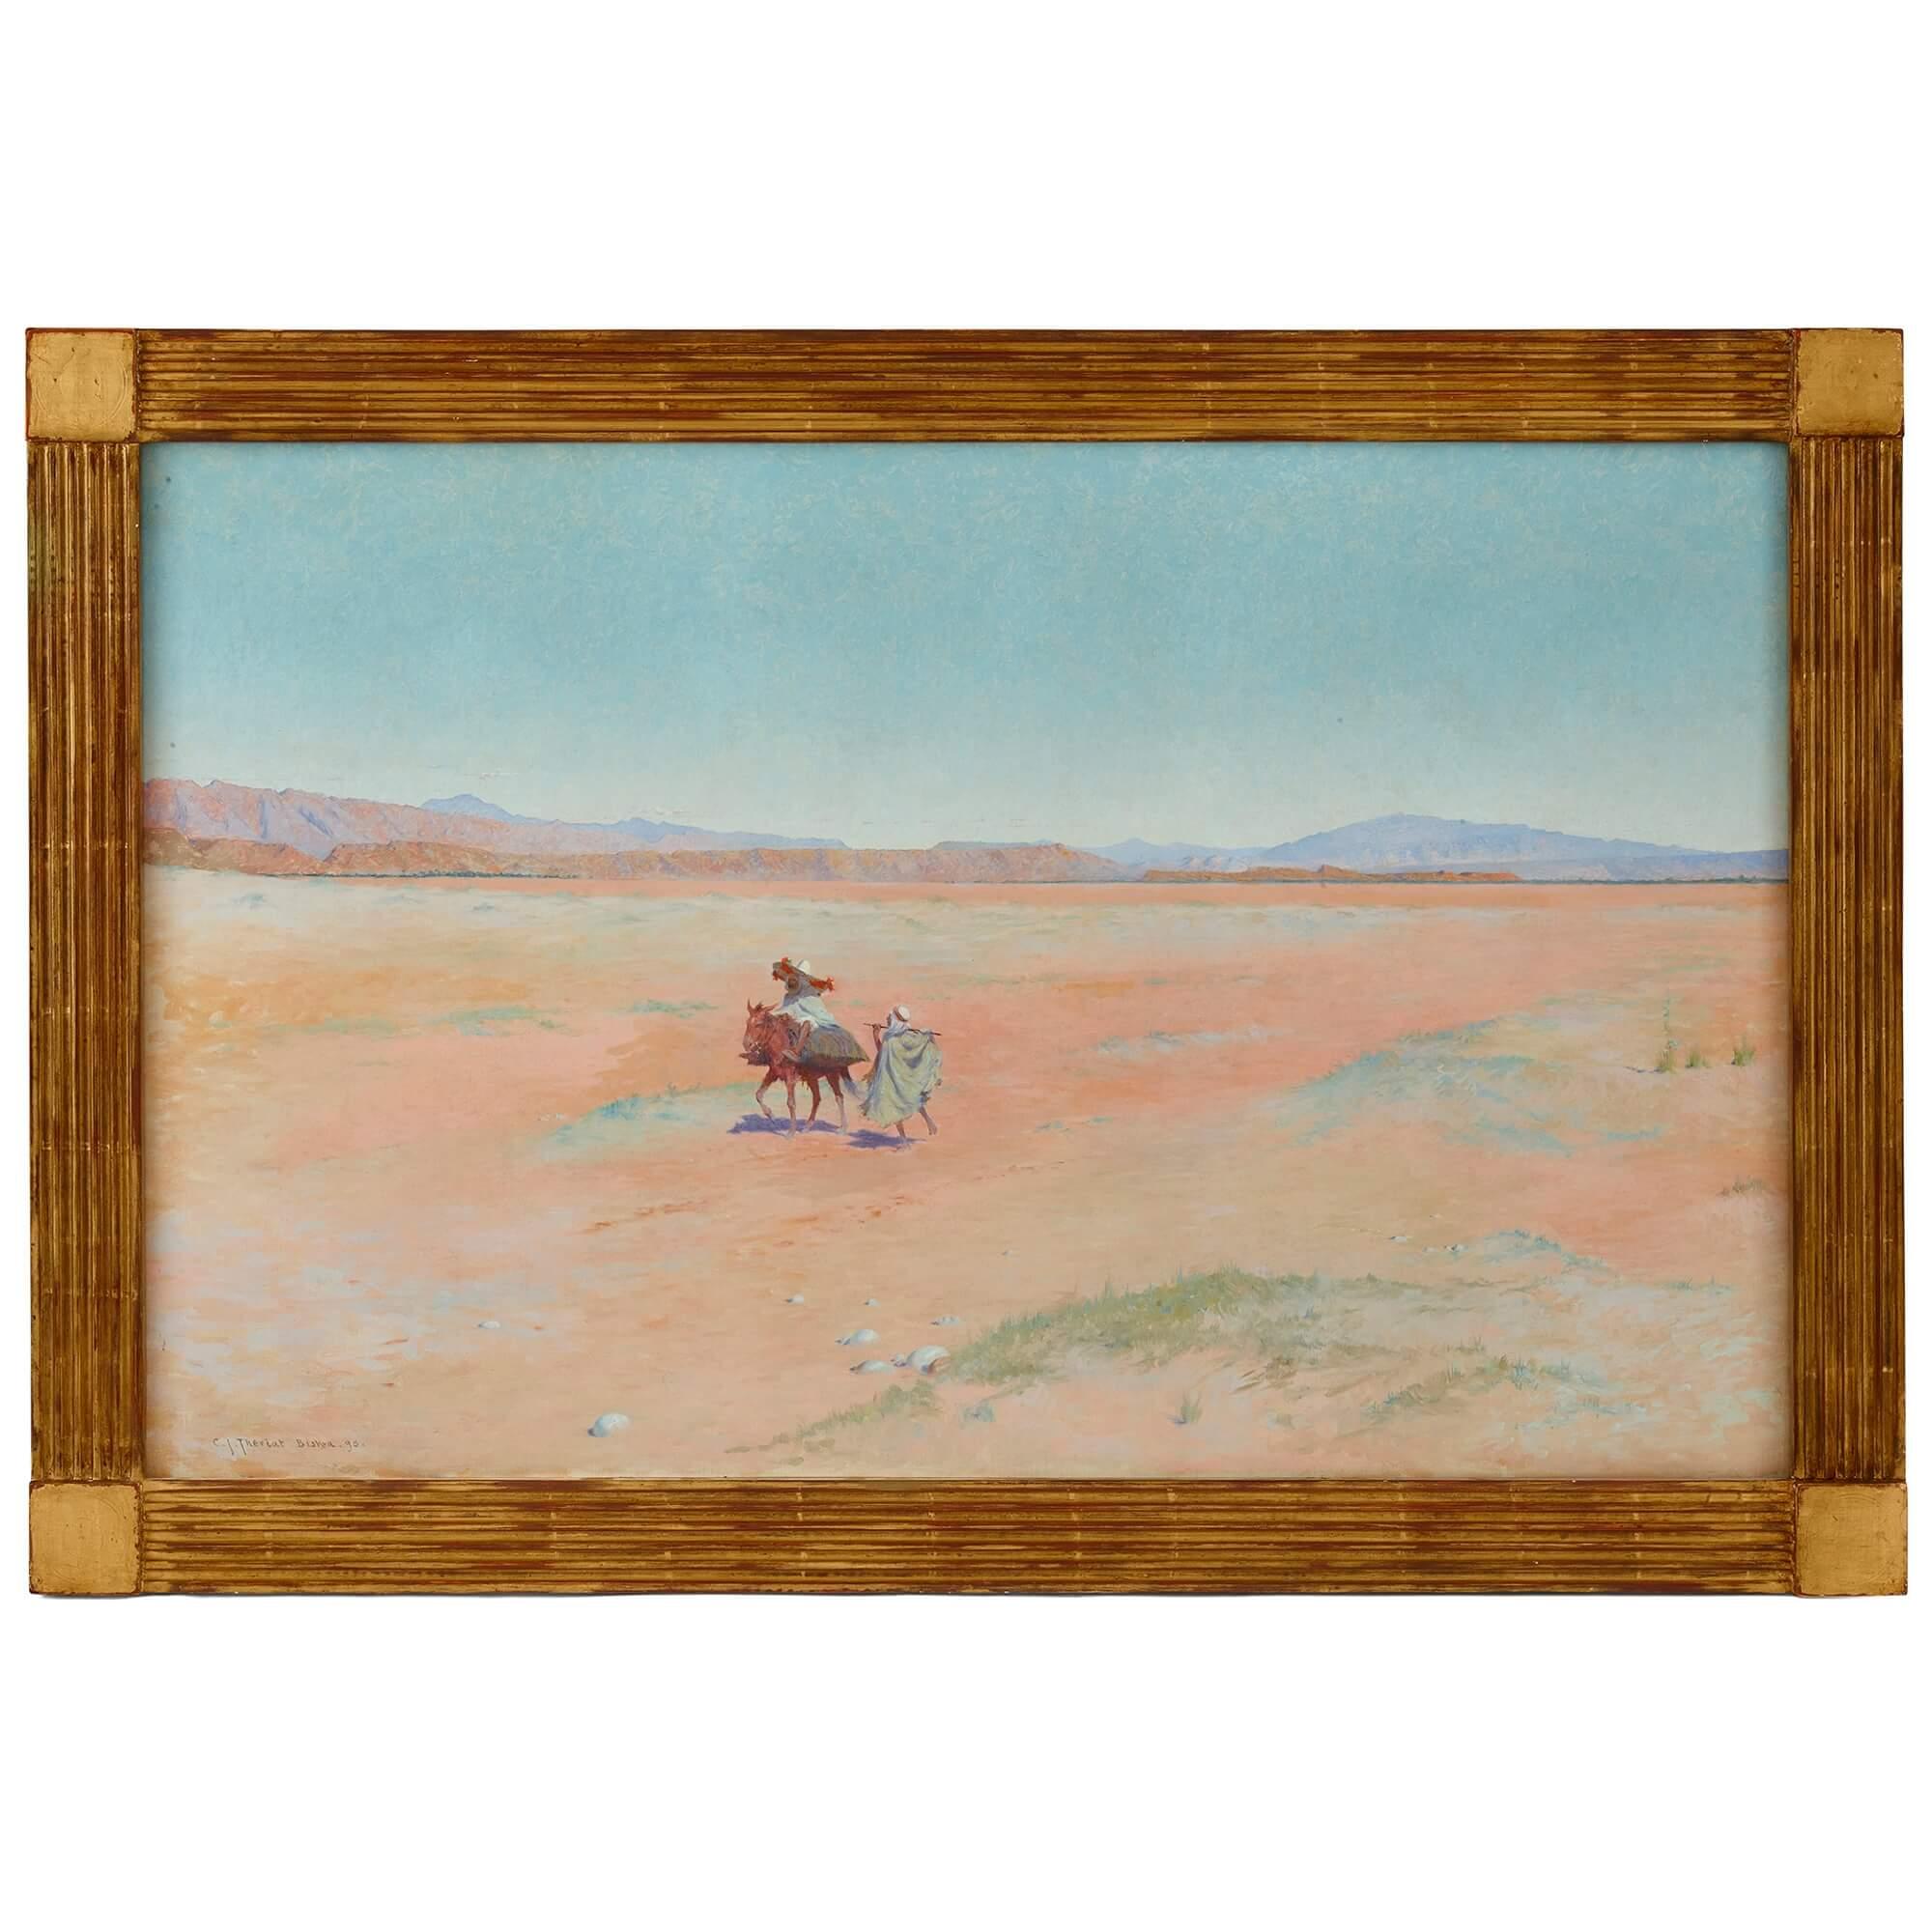 Charles James Theriat Landscape Painting - 'Travellers in the Desert, ' A large Orientalist painting by C. J. Theriat